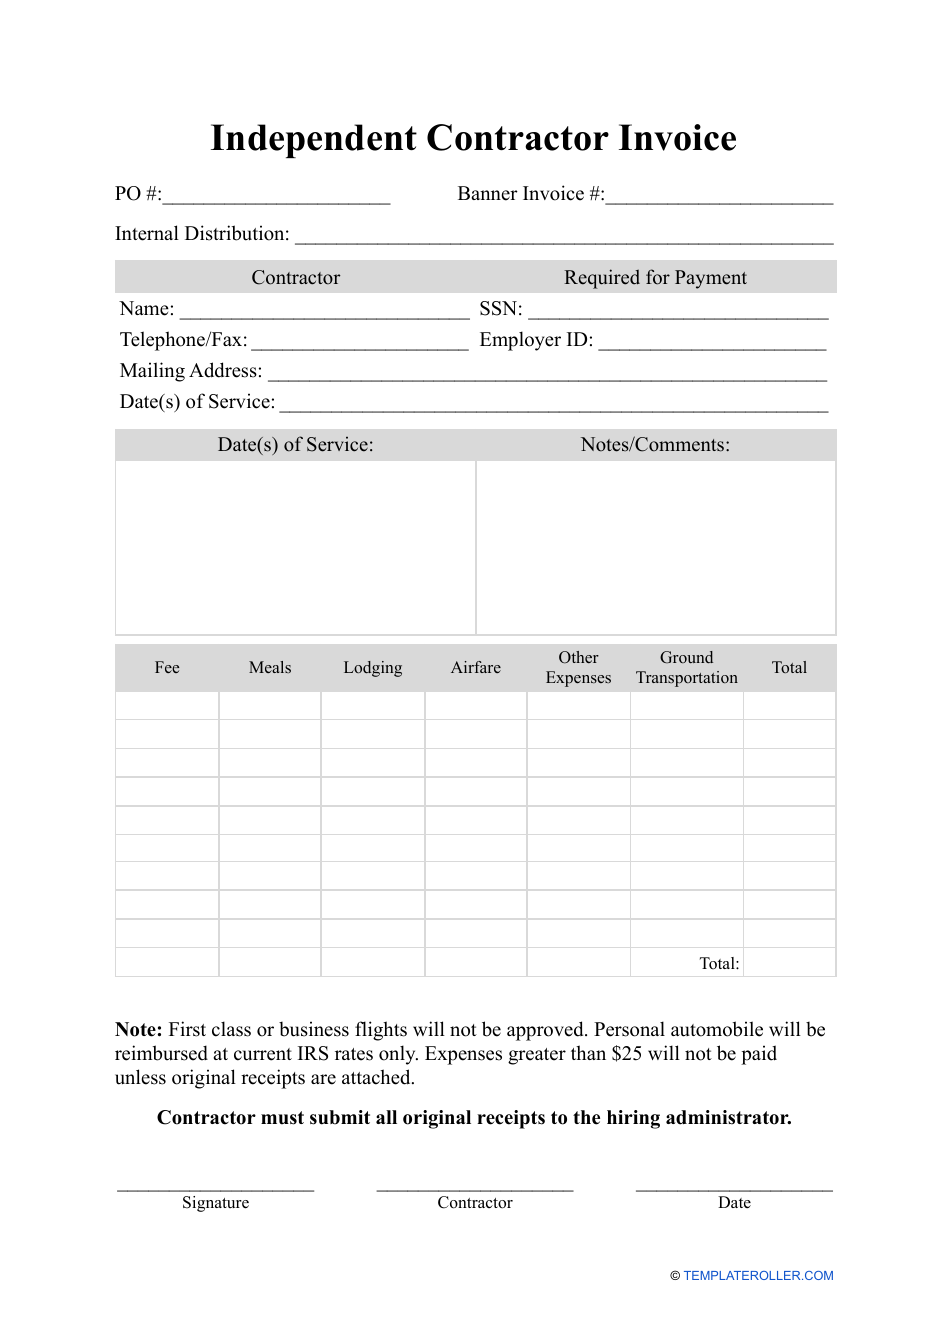 Independent Contractor Invoice Template, Page 1